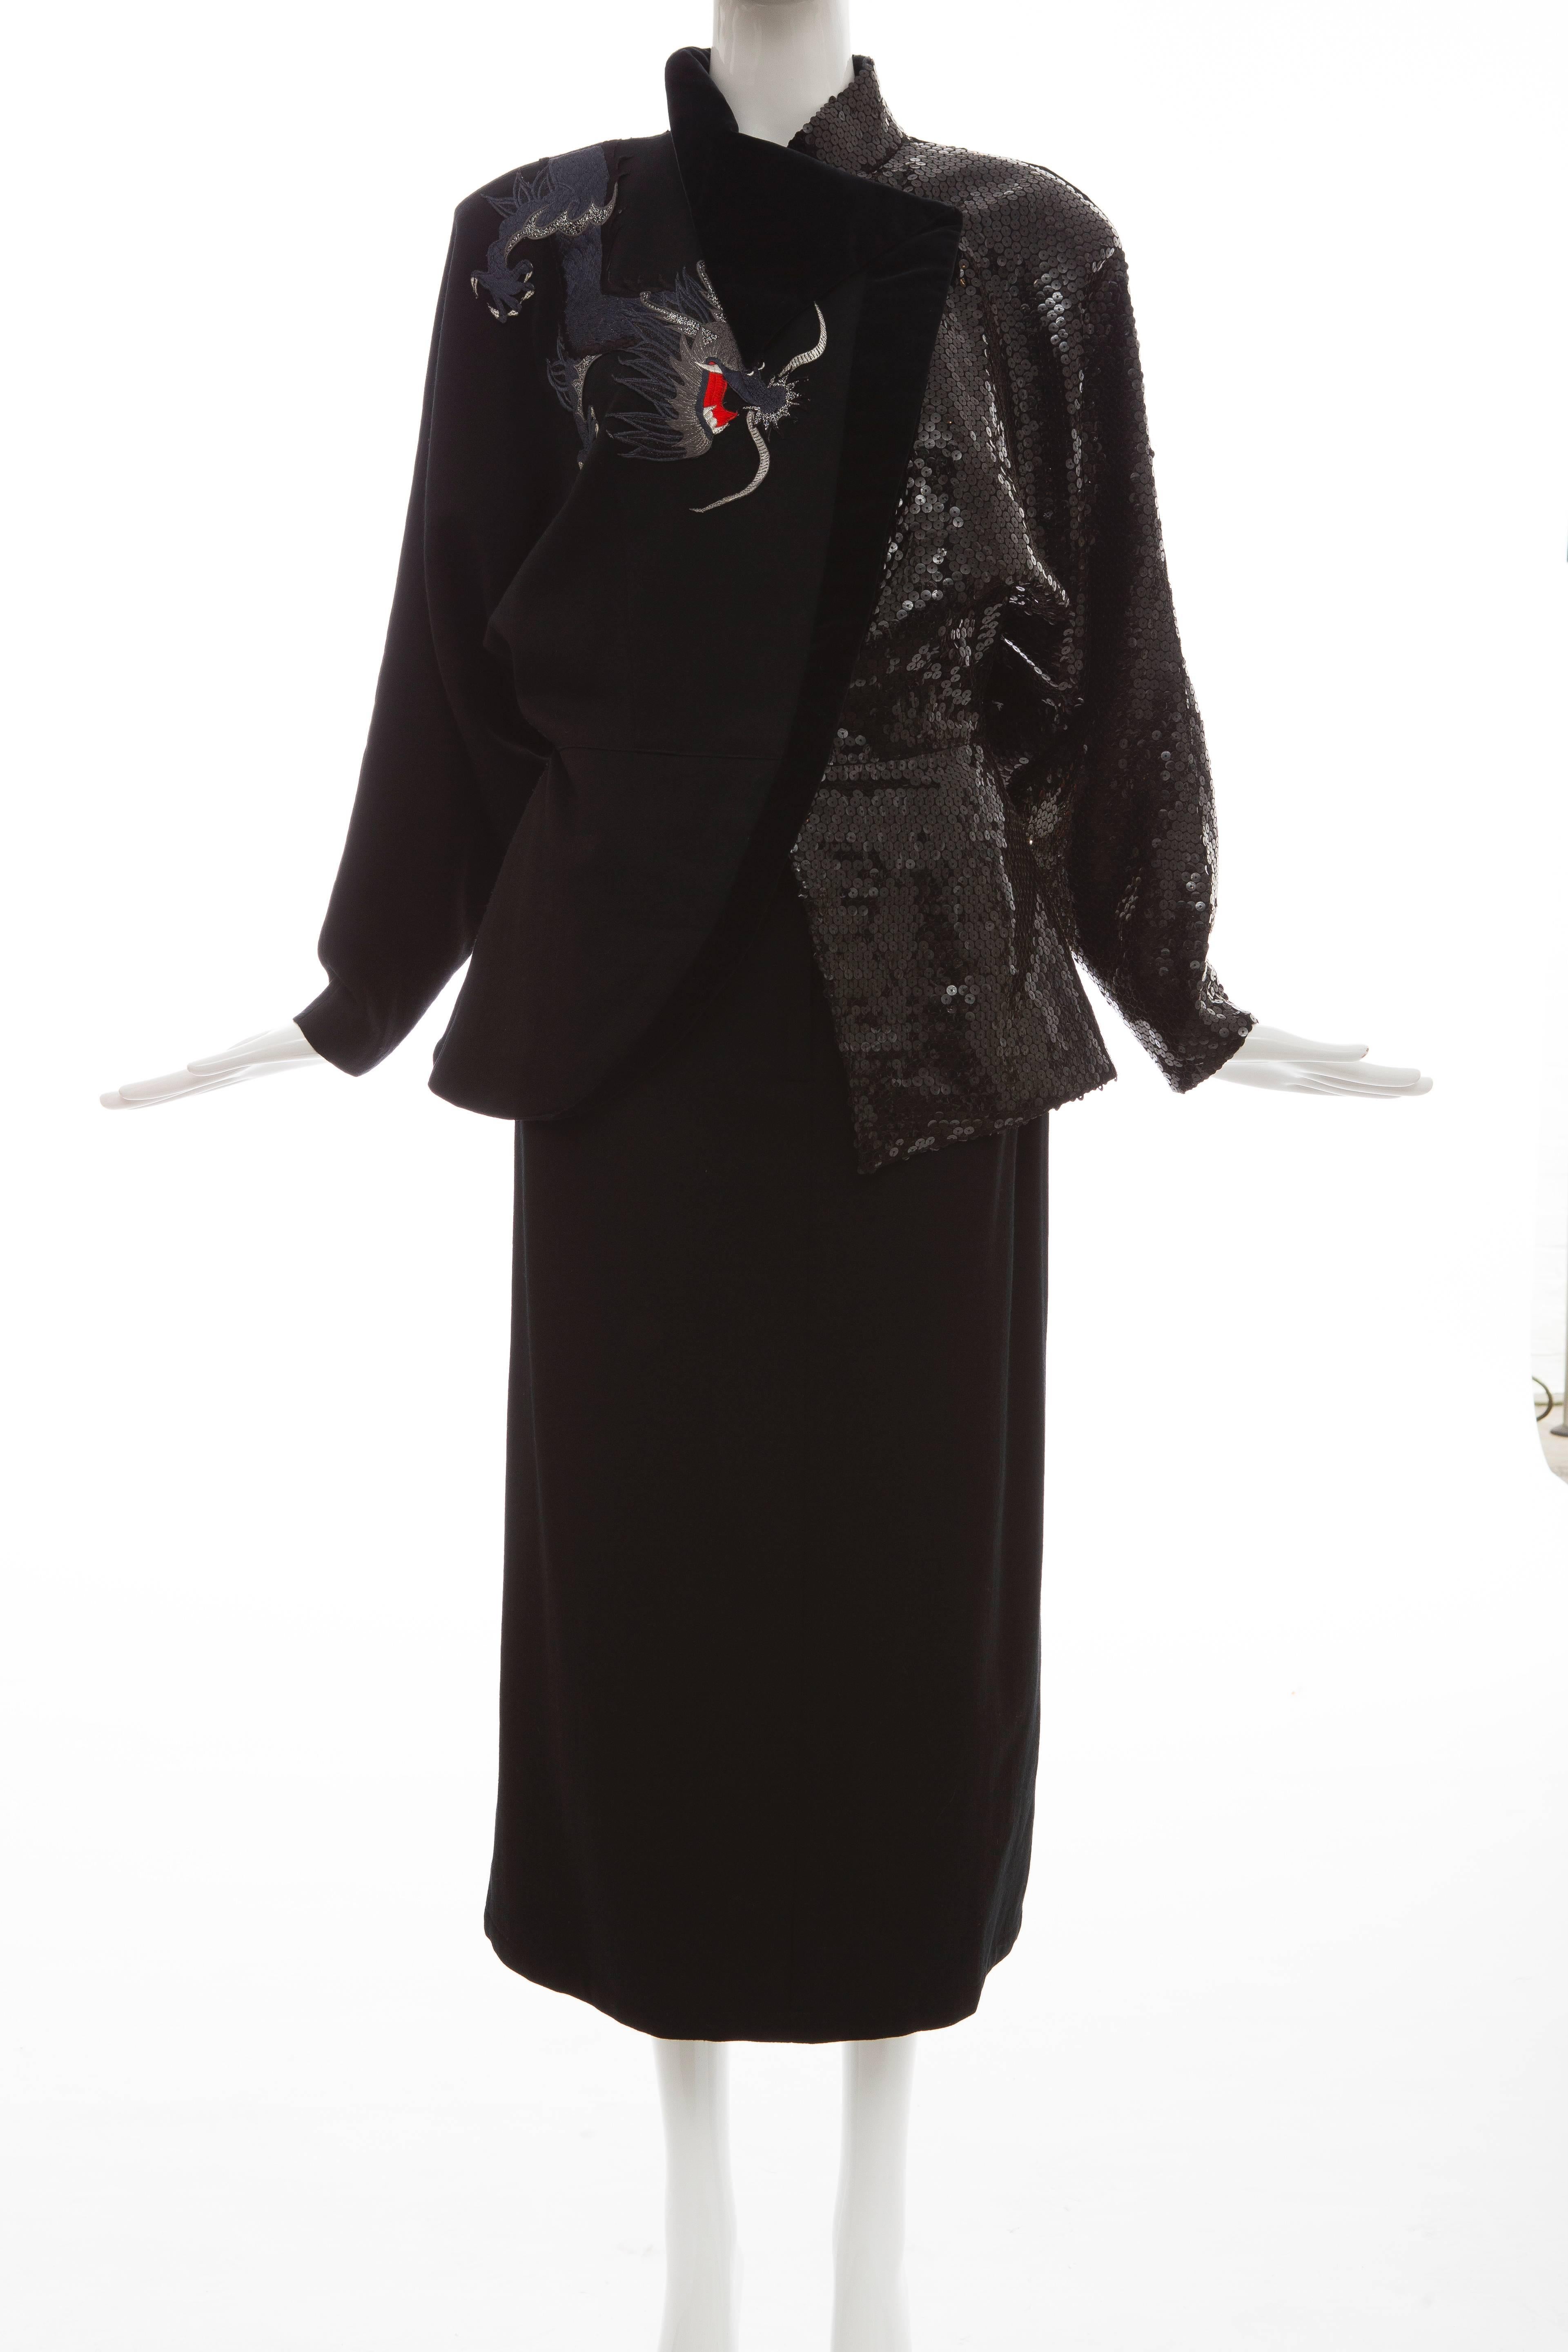 Kansai Yamamoto, circa 1980's, black wool skirt suit, snap-front jacket has embroidered dragon, mandarin collar, velvet trim, half wool and sequins and fully lined with zip and button front skirt.

Jacket: Japan, Medium
Skirt: Japan,